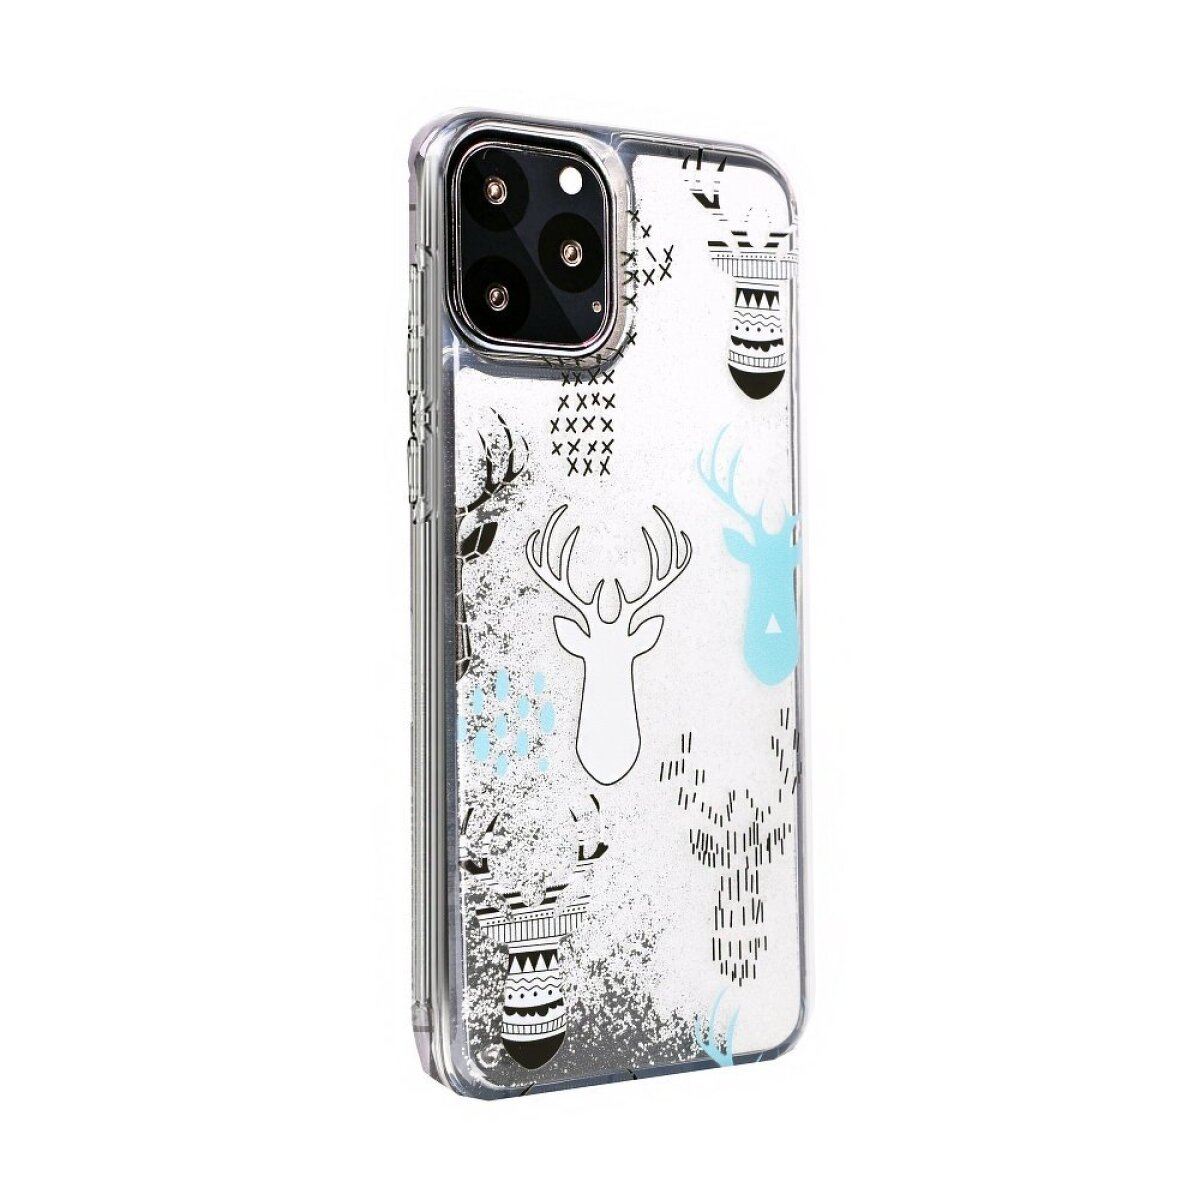 FORCELL Winter P P Huawei, Full Not available Smart reindeers, 2019 smart 2019, Cover